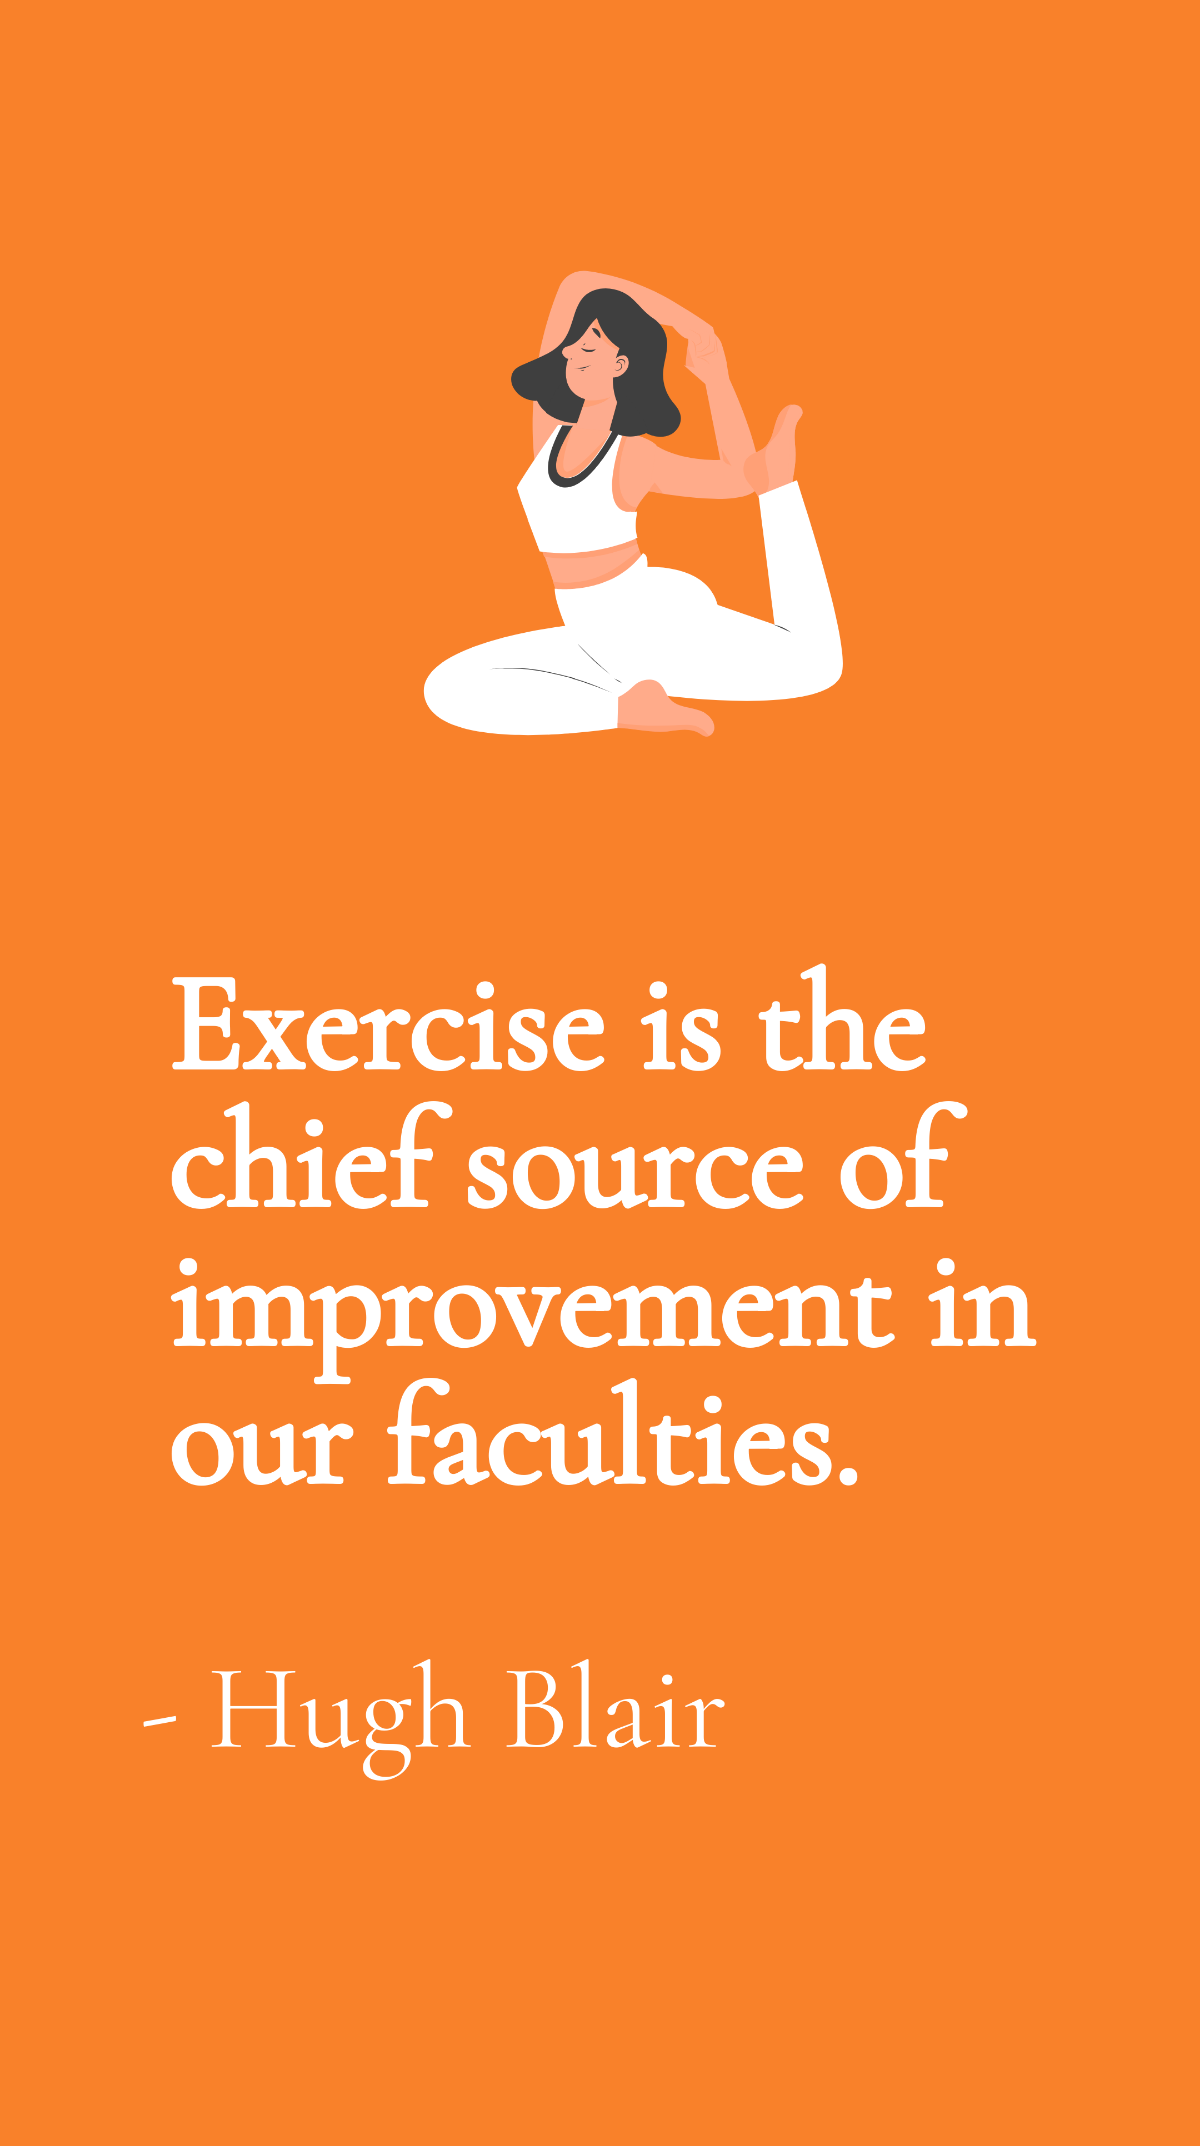 Hugh Blair - Exercise is the chief source of improvement in our faculties.